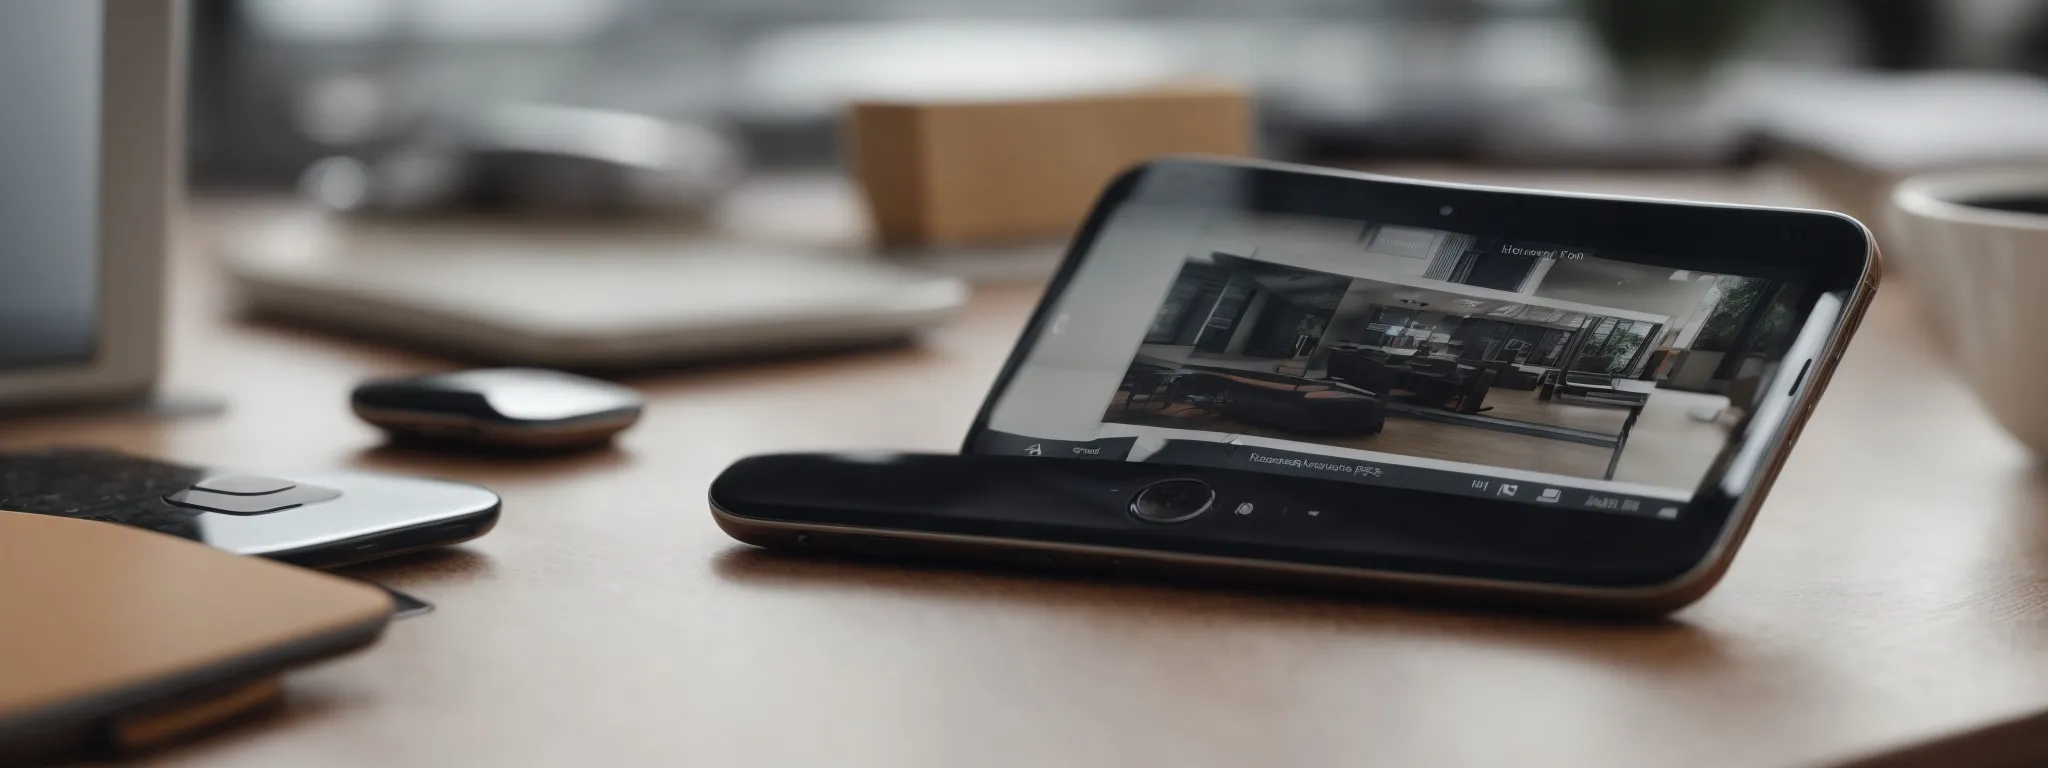 a smartphone displays a sleek, responsive website while resting on a modern workspace.